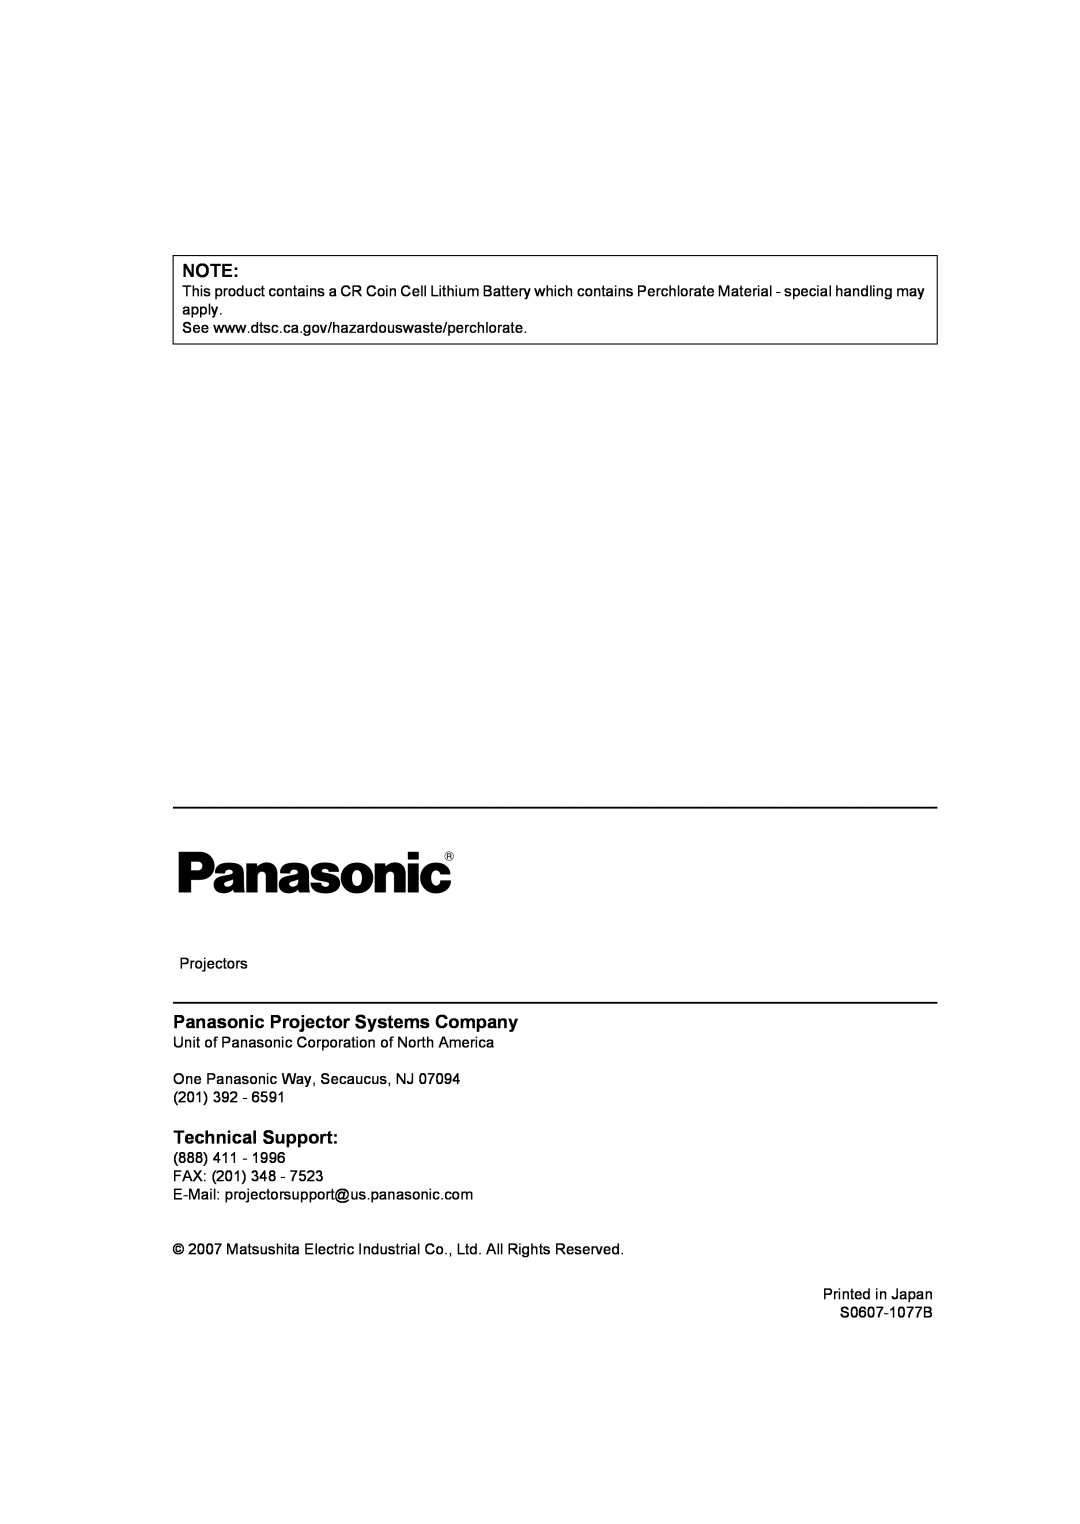 Panasonic PT-LB51NTU Panasonic Projector Systems Company, Technical Support, Projectors, Printed in Japan S0607-1077B 